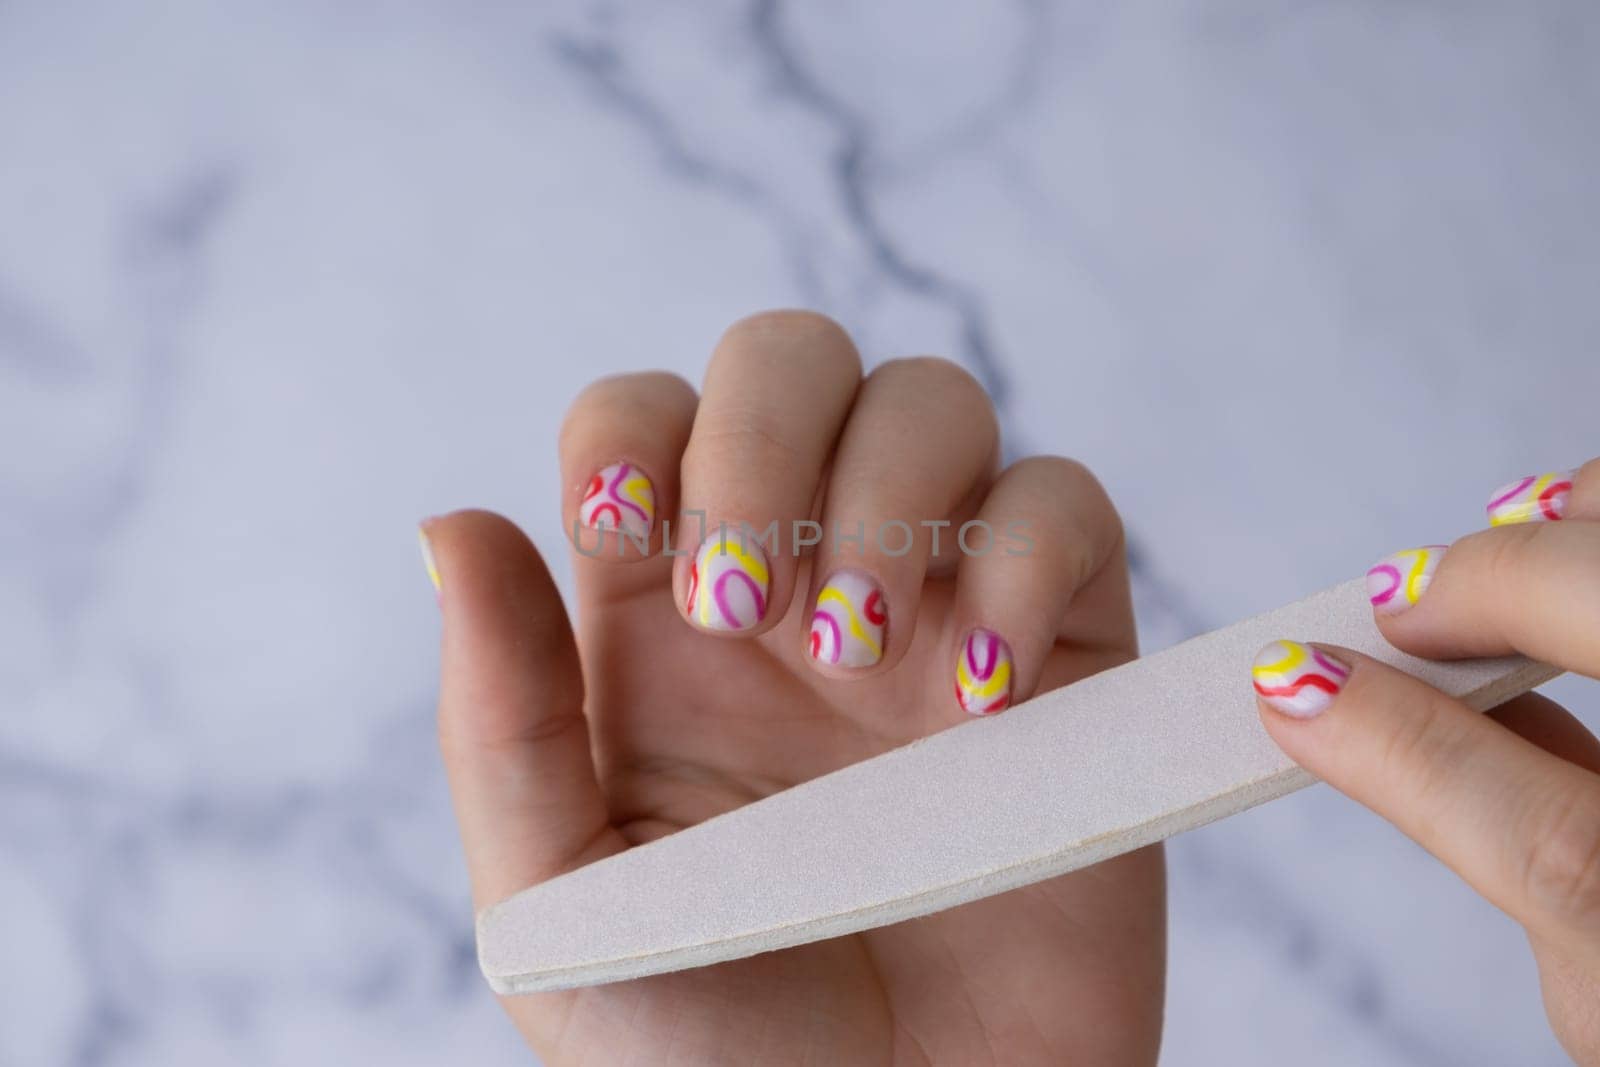 Manicure tools Pastel softness colorful manicured nails. Woman showing her new summer manicure in colors of pastel palette. Simplicity decor fresh spring vibes earth-colored neutral tones design